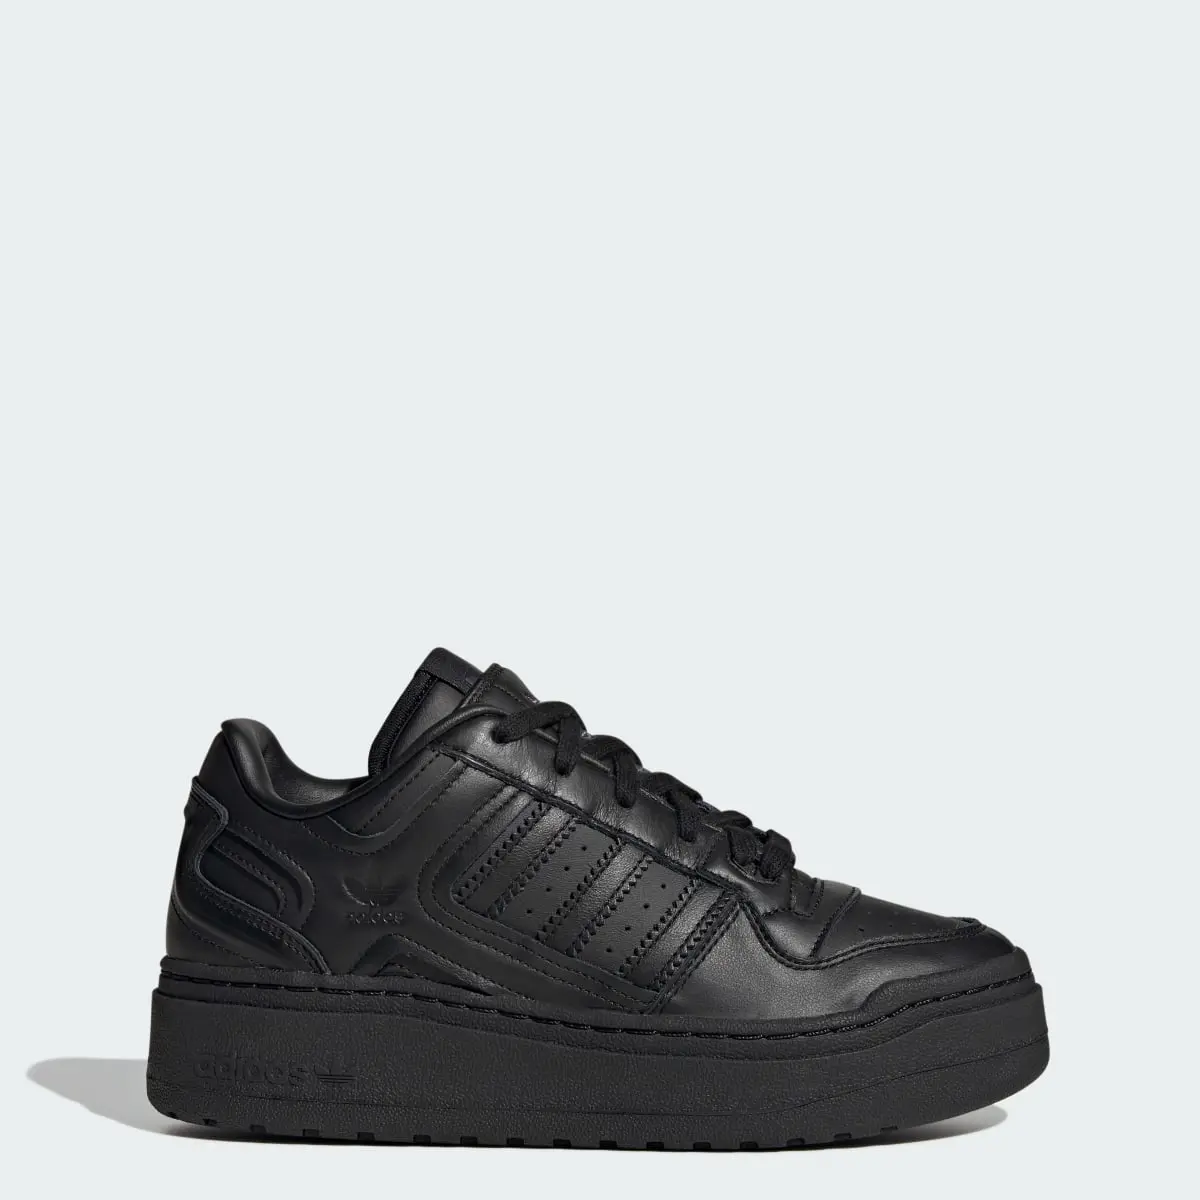 Adidas Forum XLG Shoes. 1